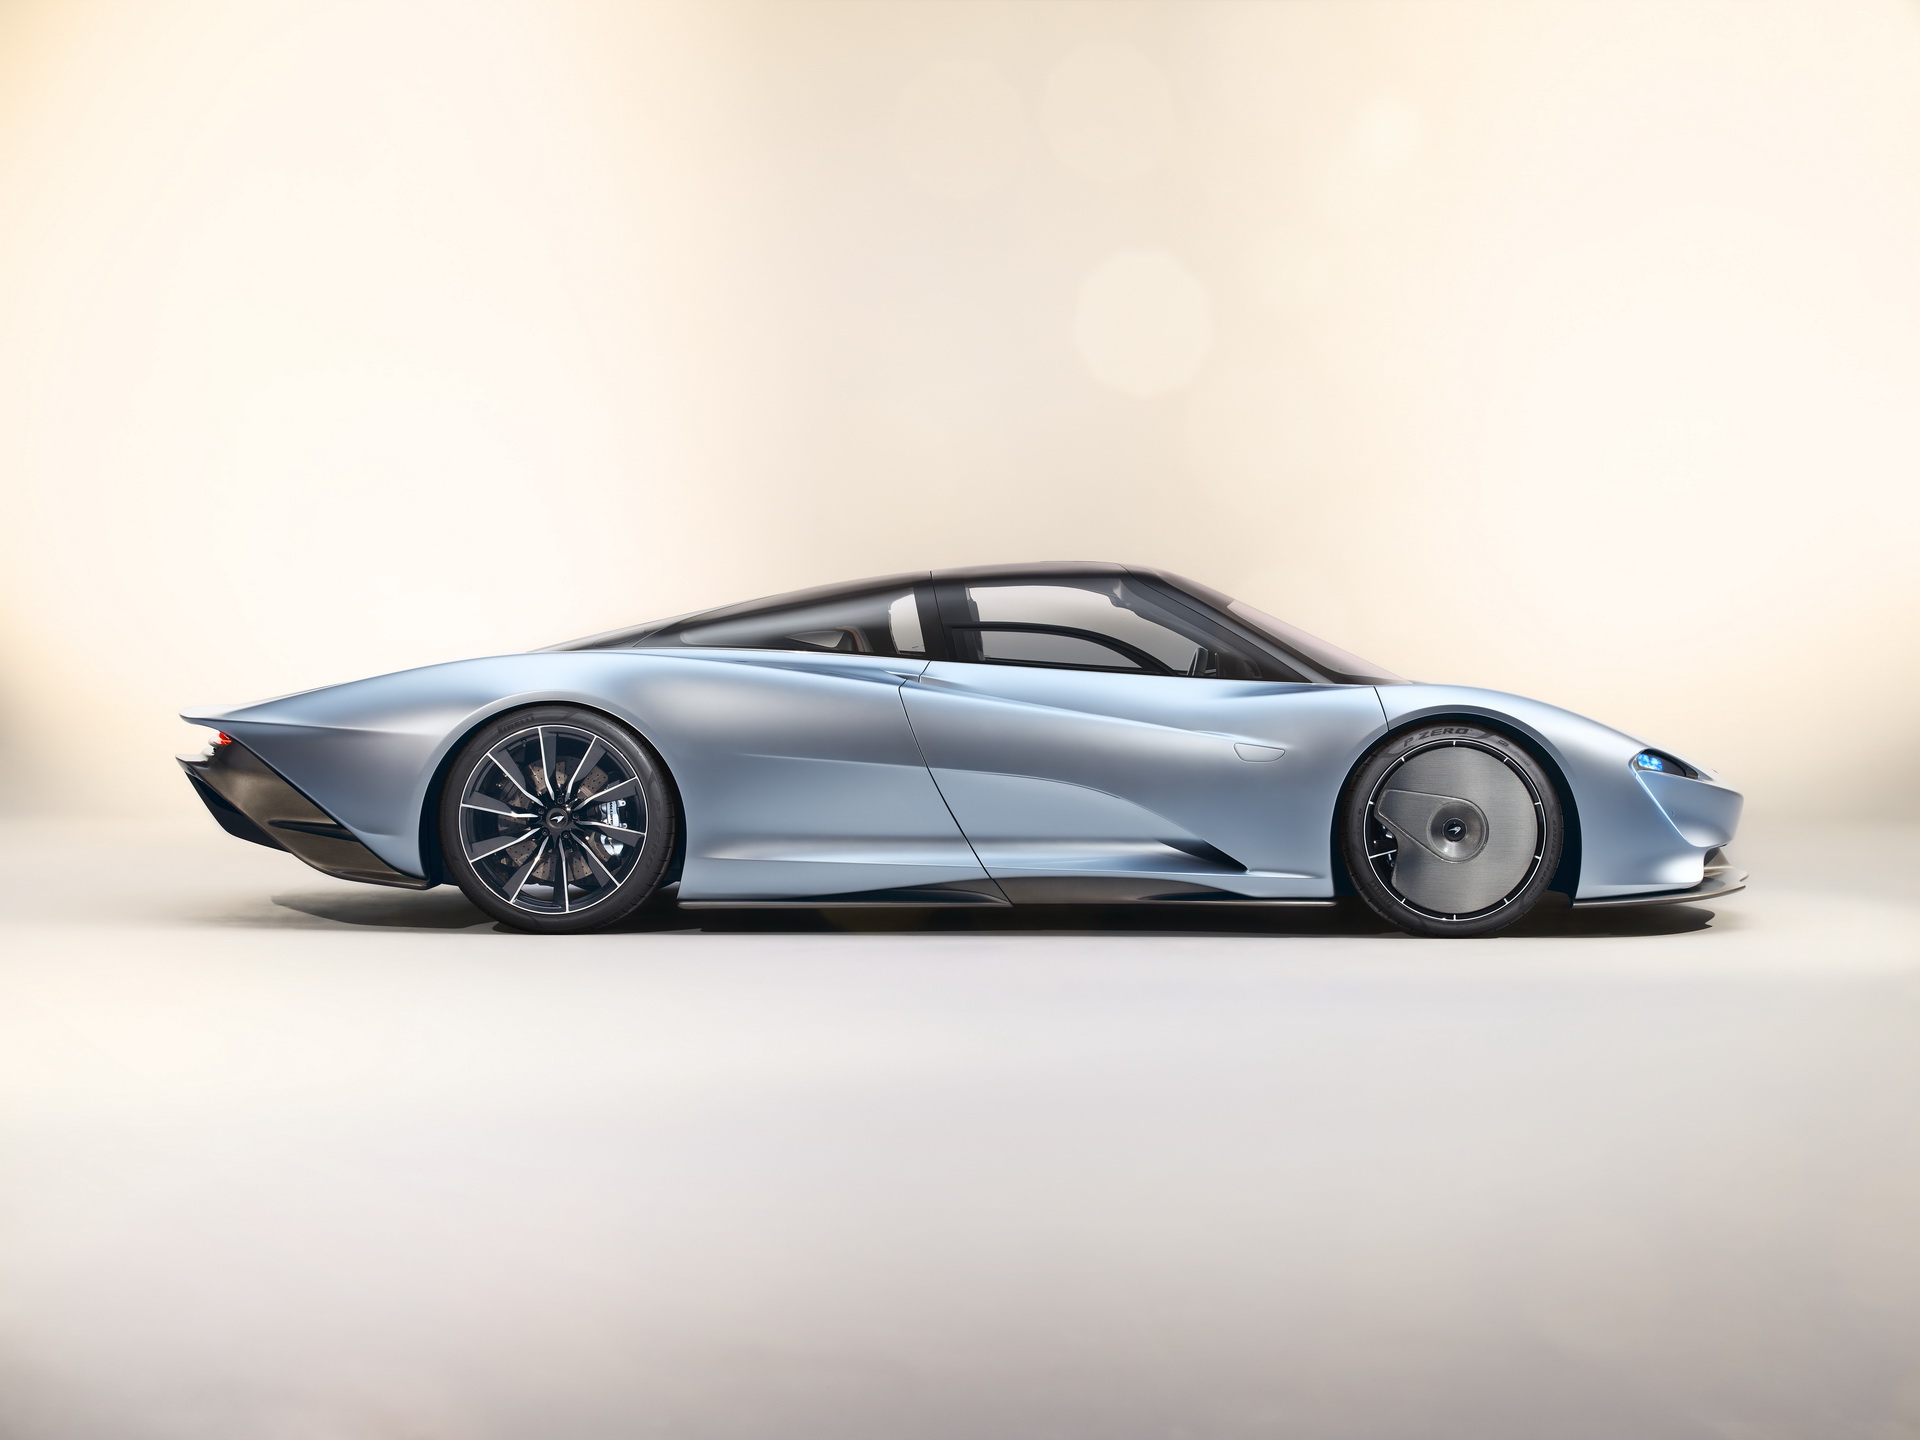 McLaren Speedtail is a hypercar spaceship with central driving position, 1,035 hp